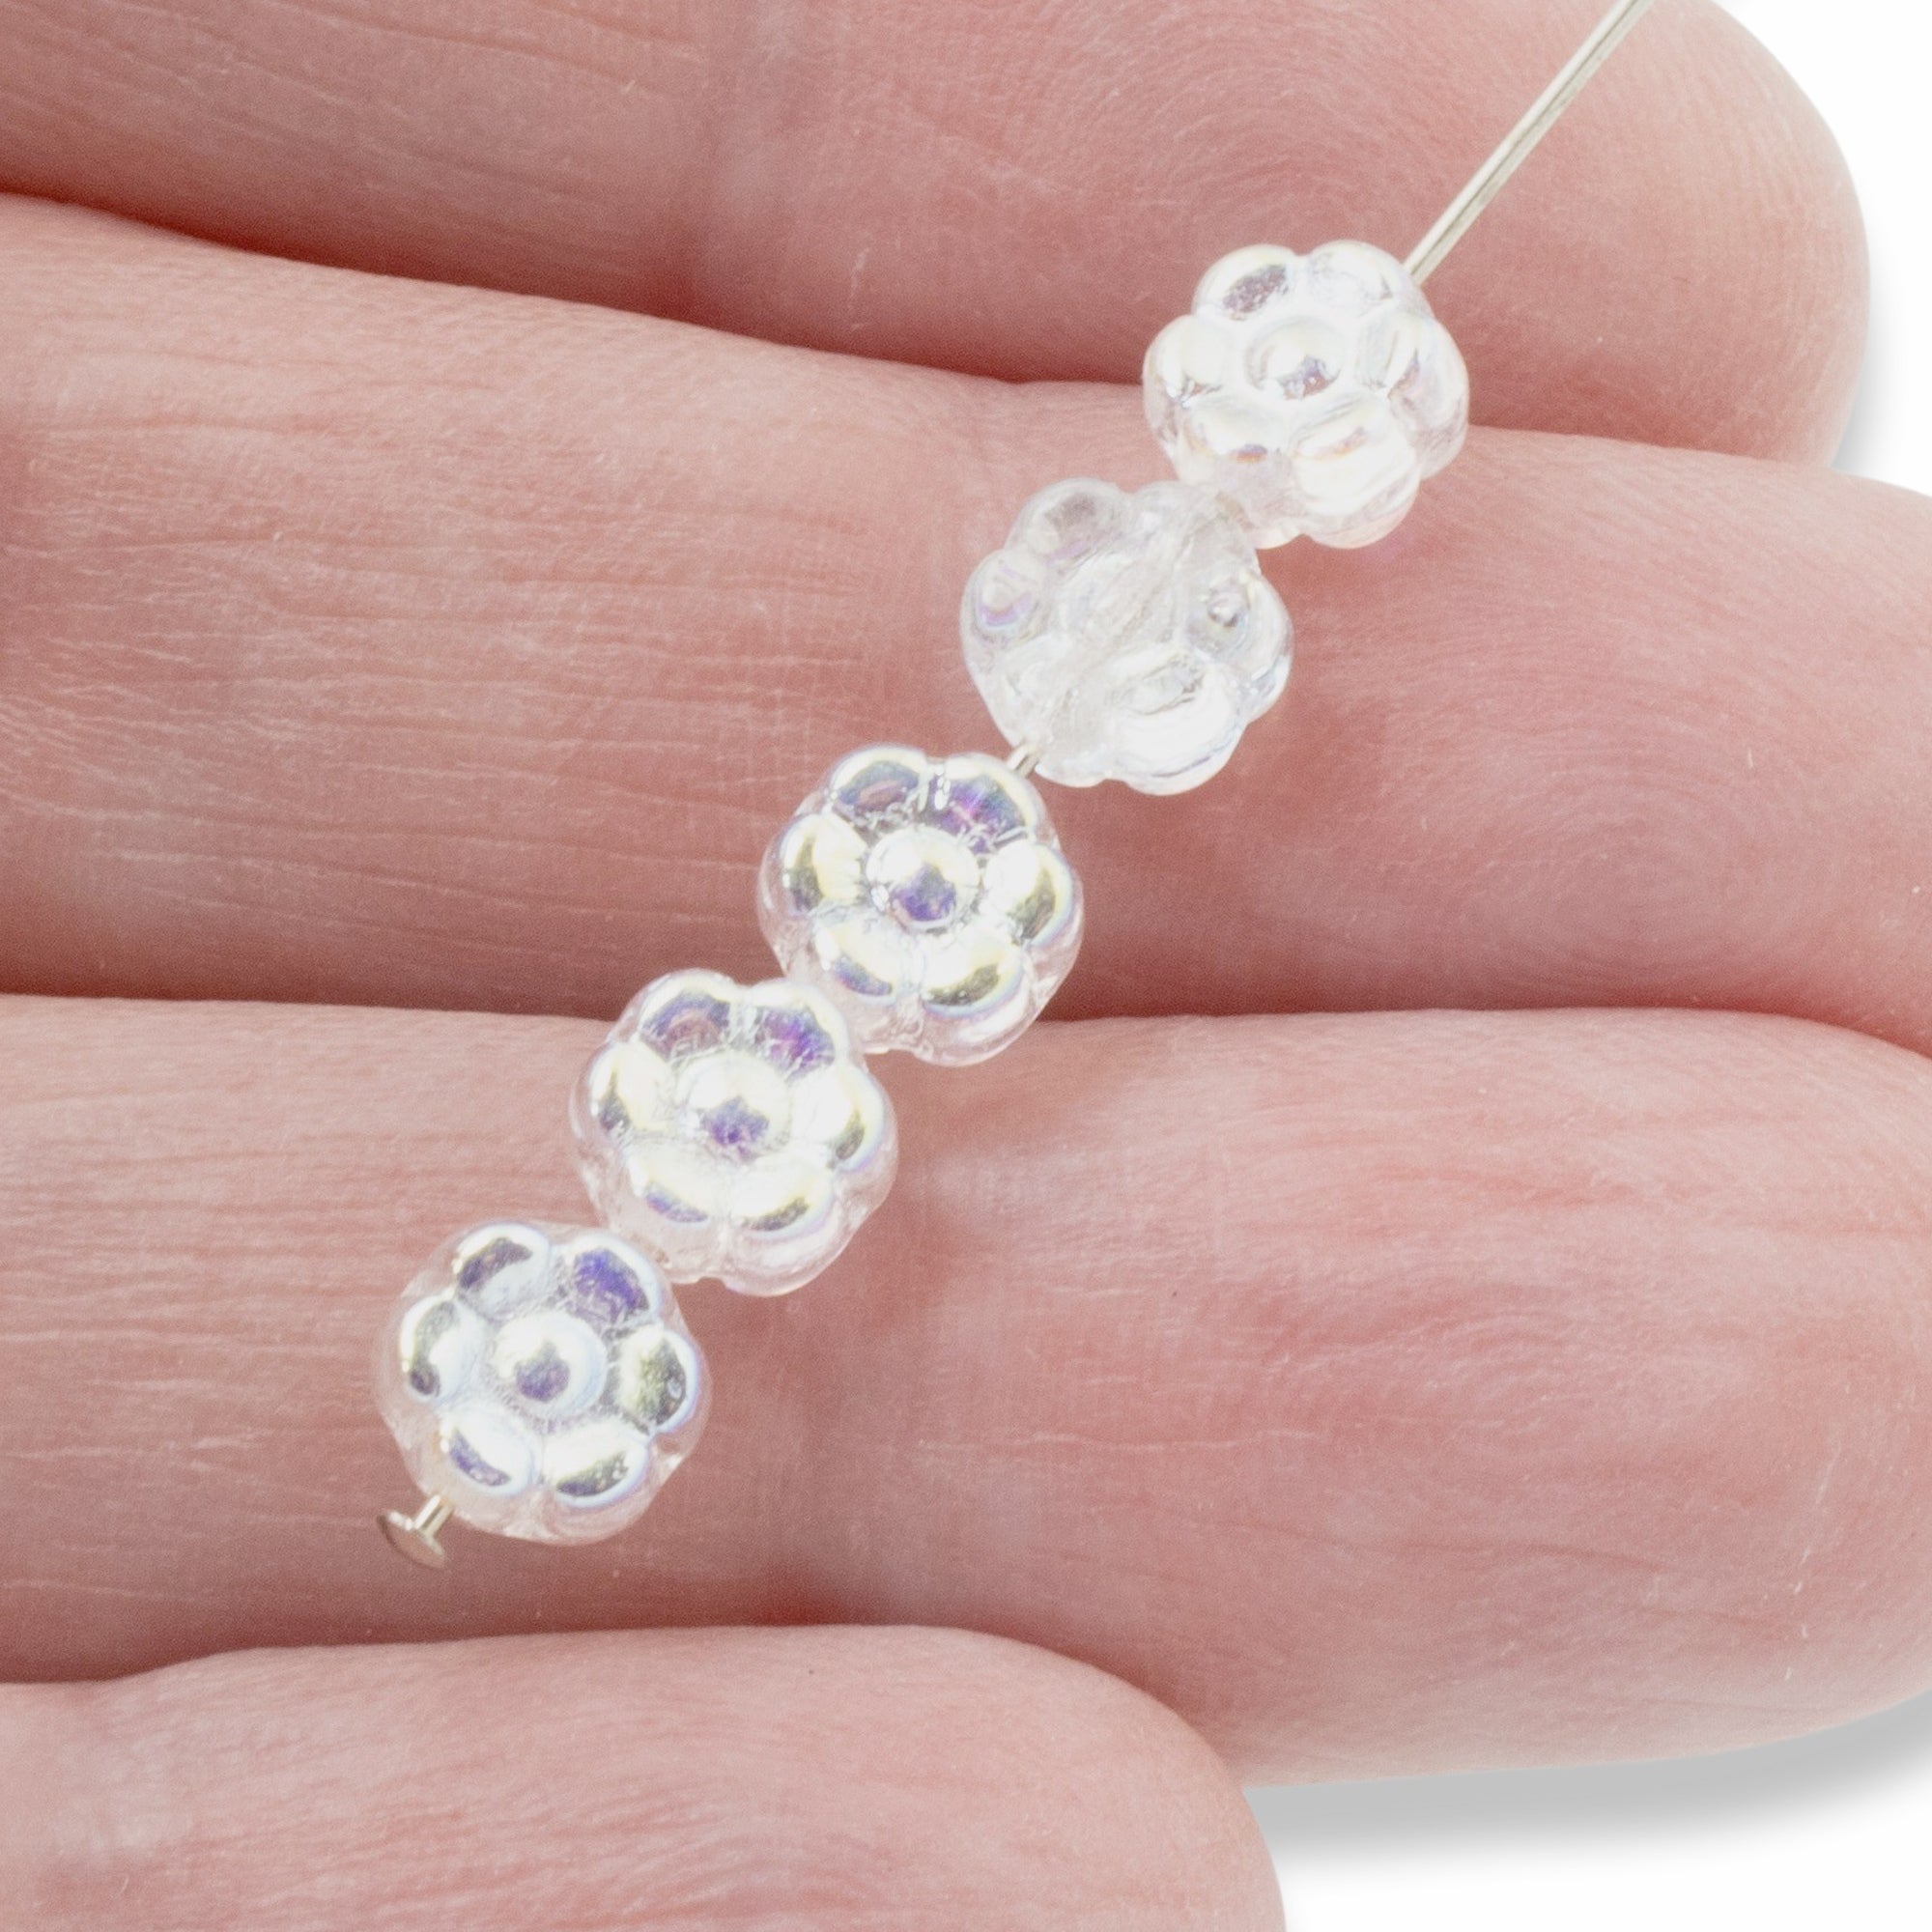 7mm Crystal clear flower bead caps Czech glass small floral beads 50Pc –  MayaHoney beads